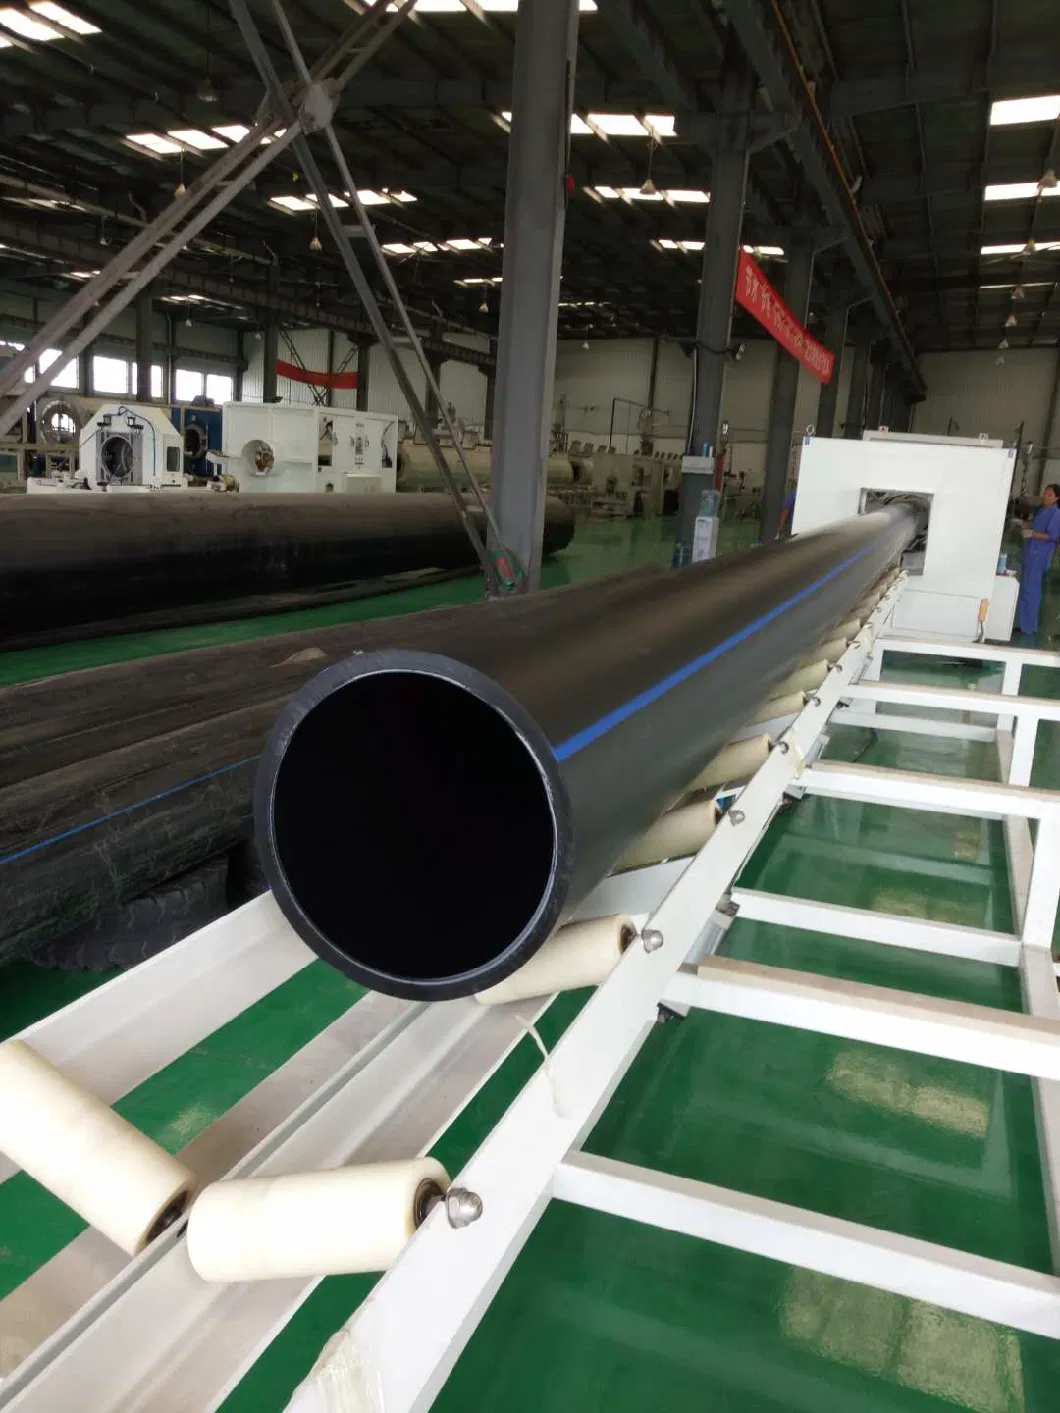 High Quality HDPE Water Pipe PE Plastic Price